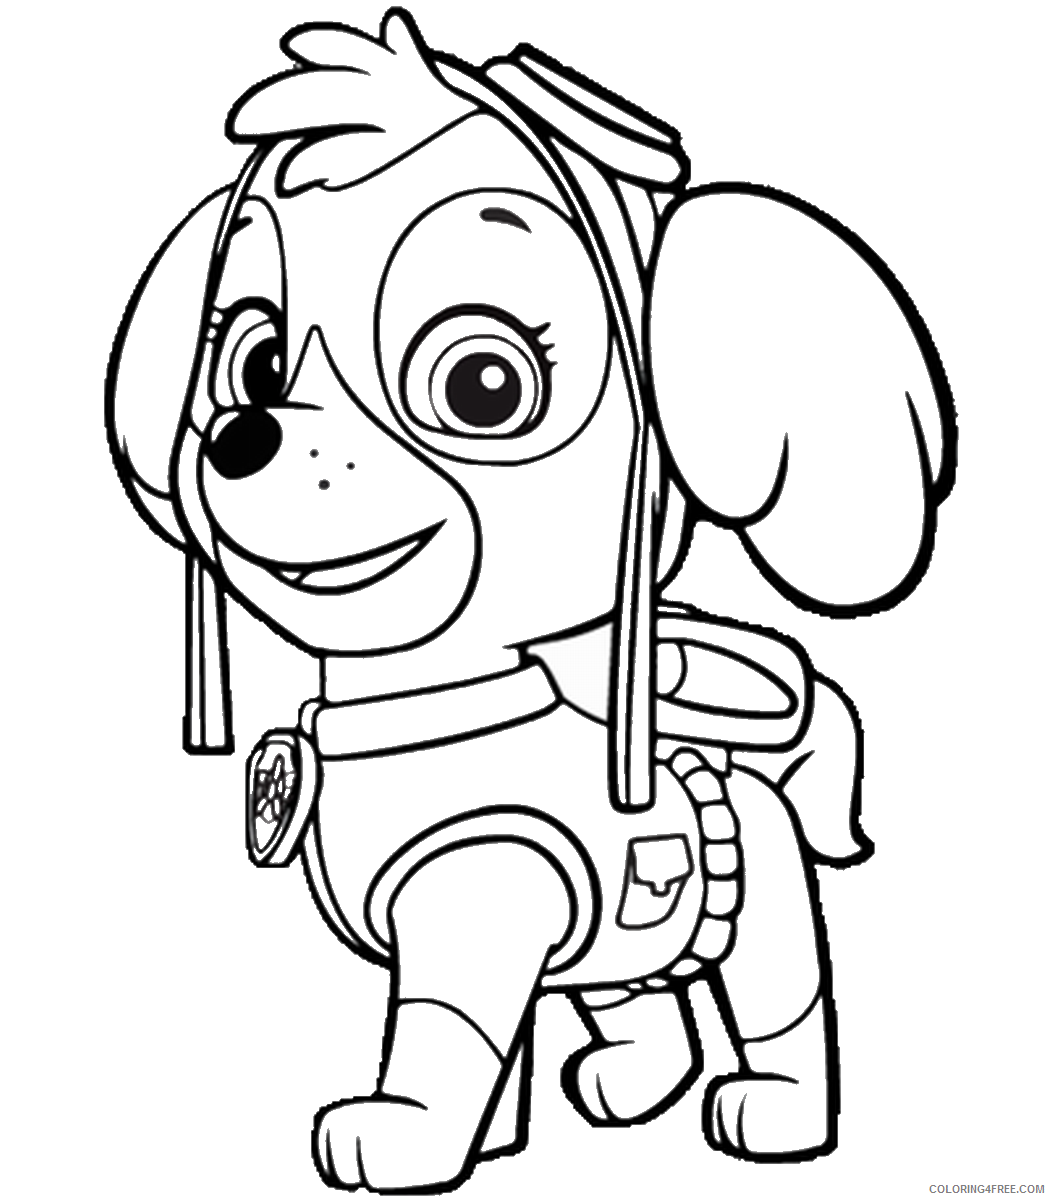 Paw Patrol Coloring Pages TV Film Printable 2020 05935 Coloring4free